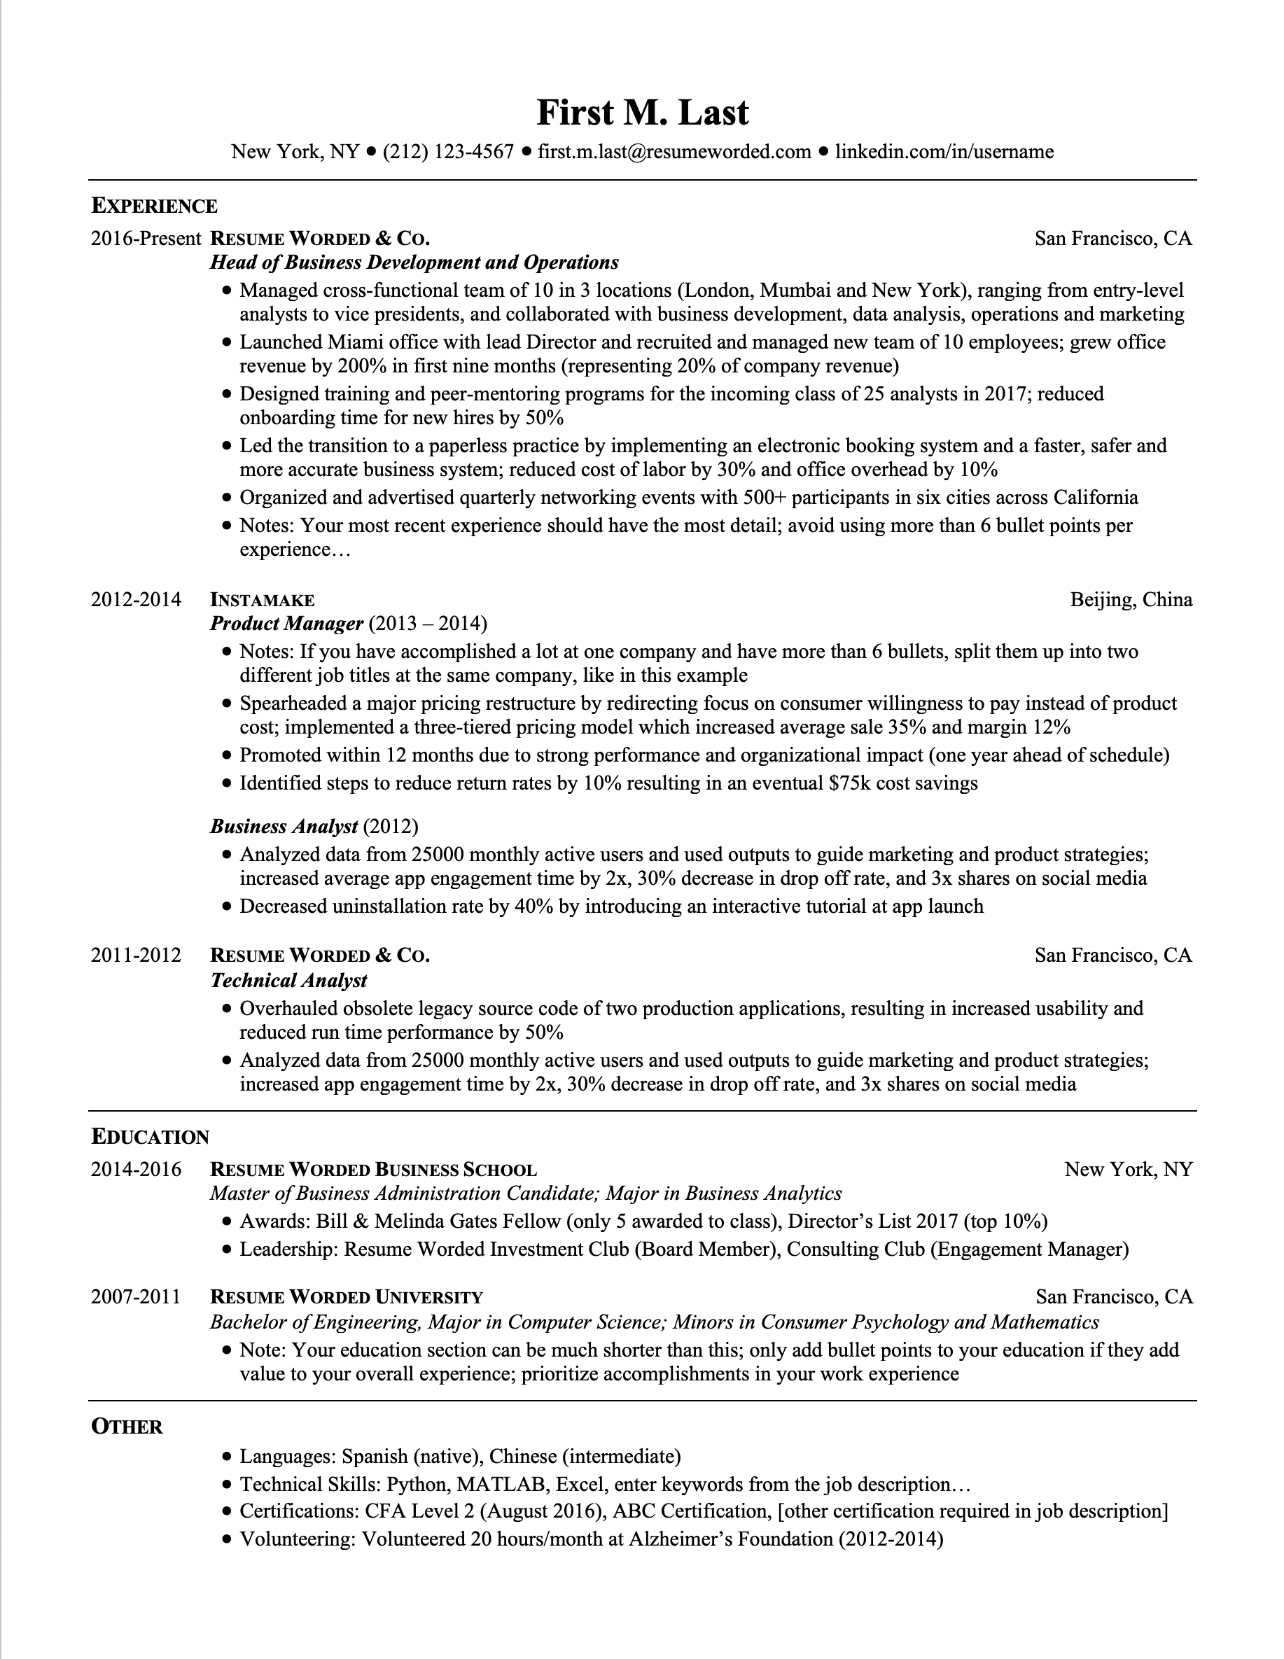 Professional ATS Resume Templates for Experienced Hires and College